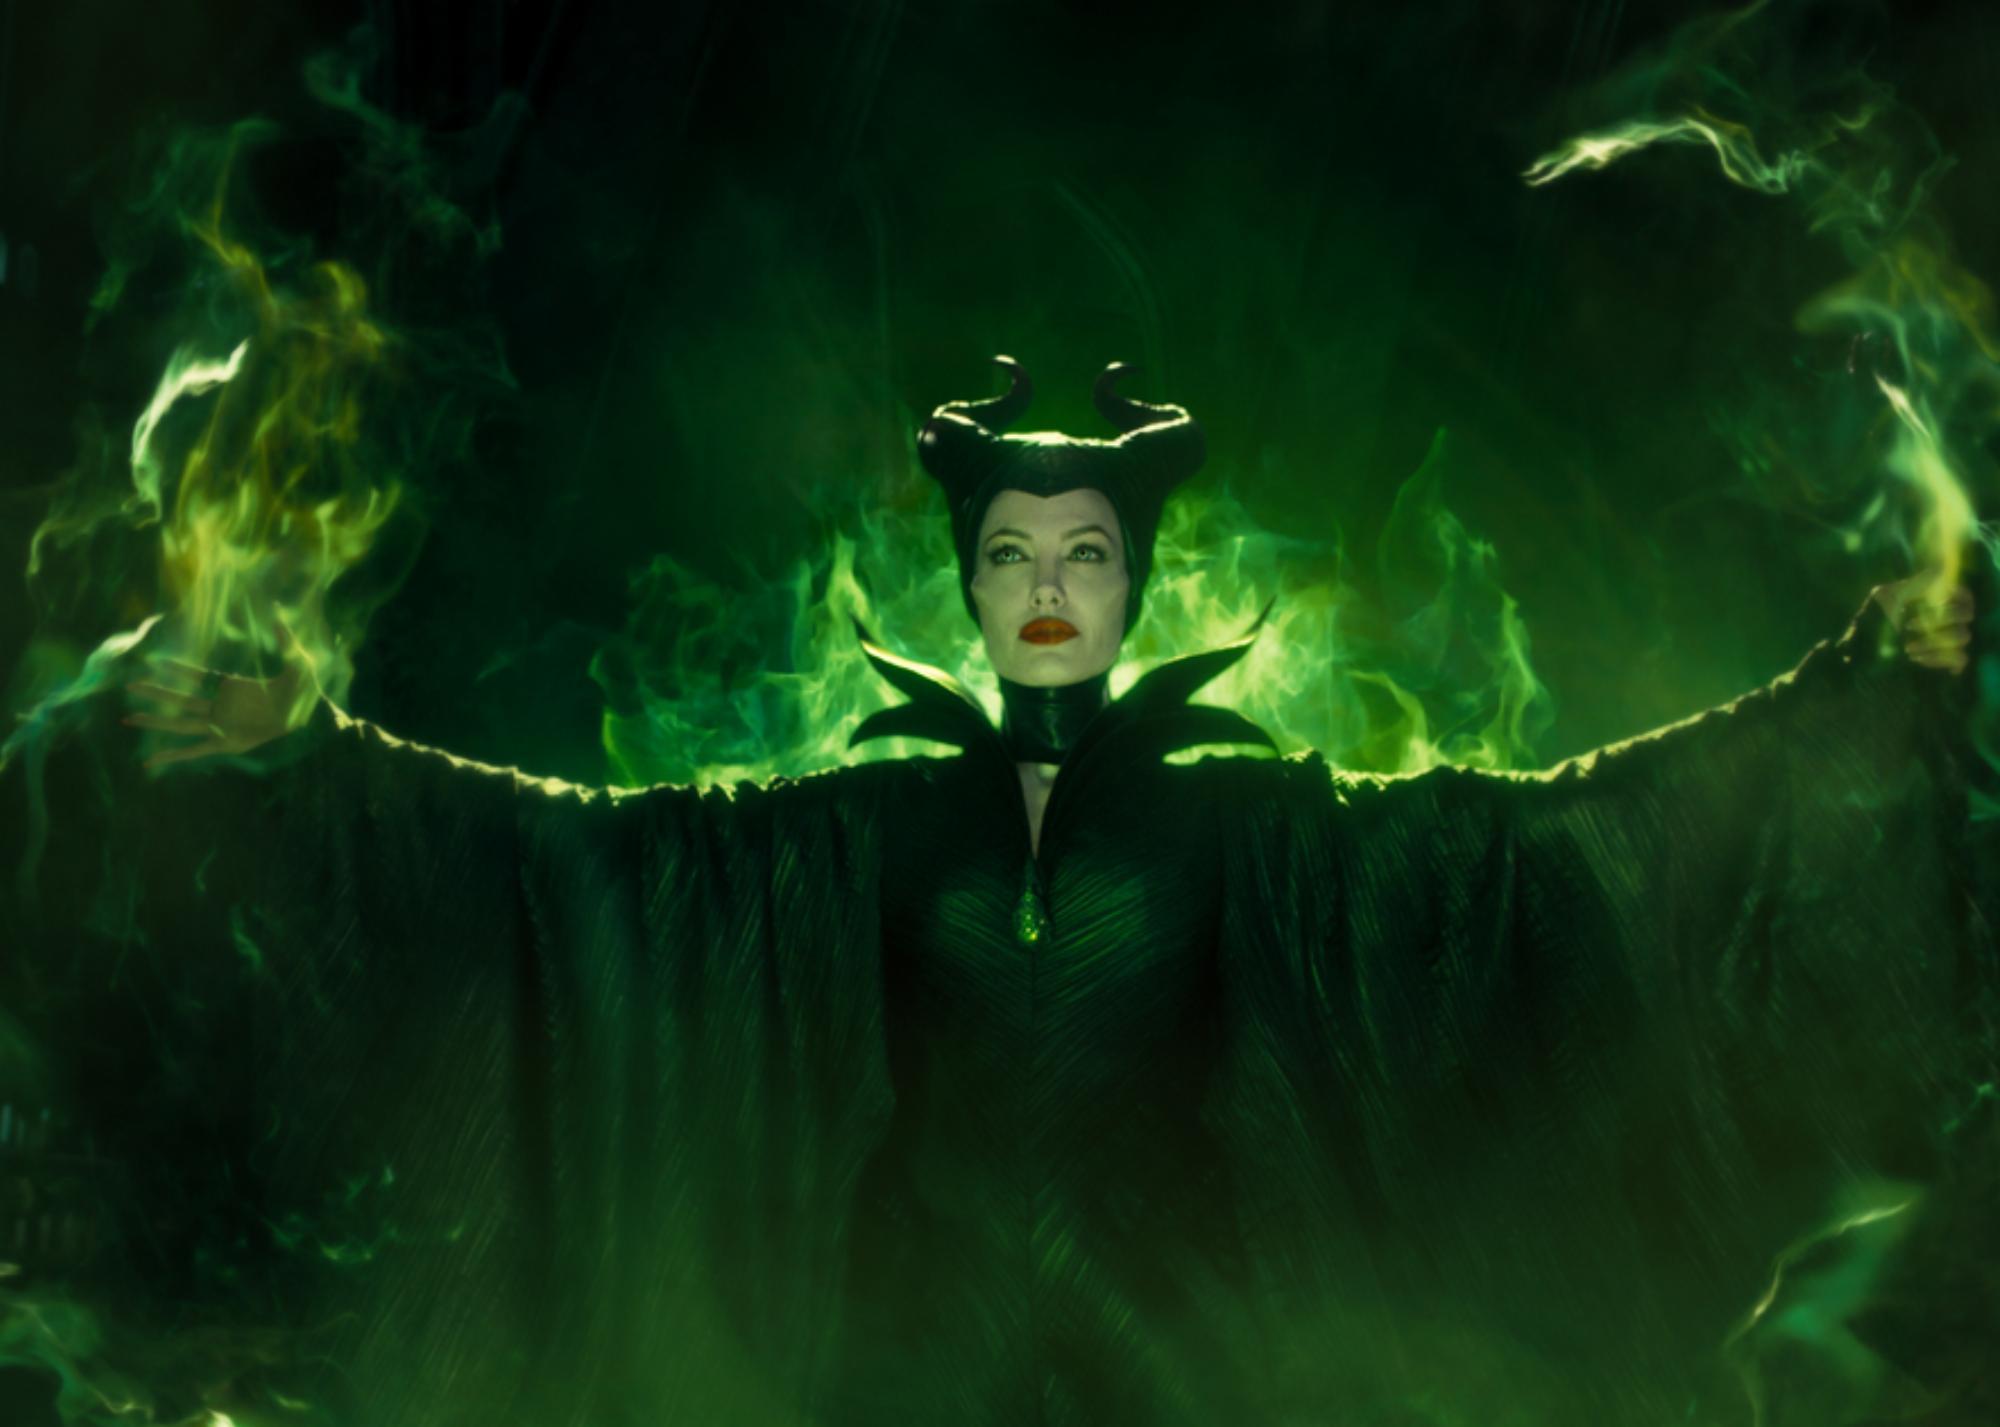 Your Guide to Maleficent: Mistress of Evil